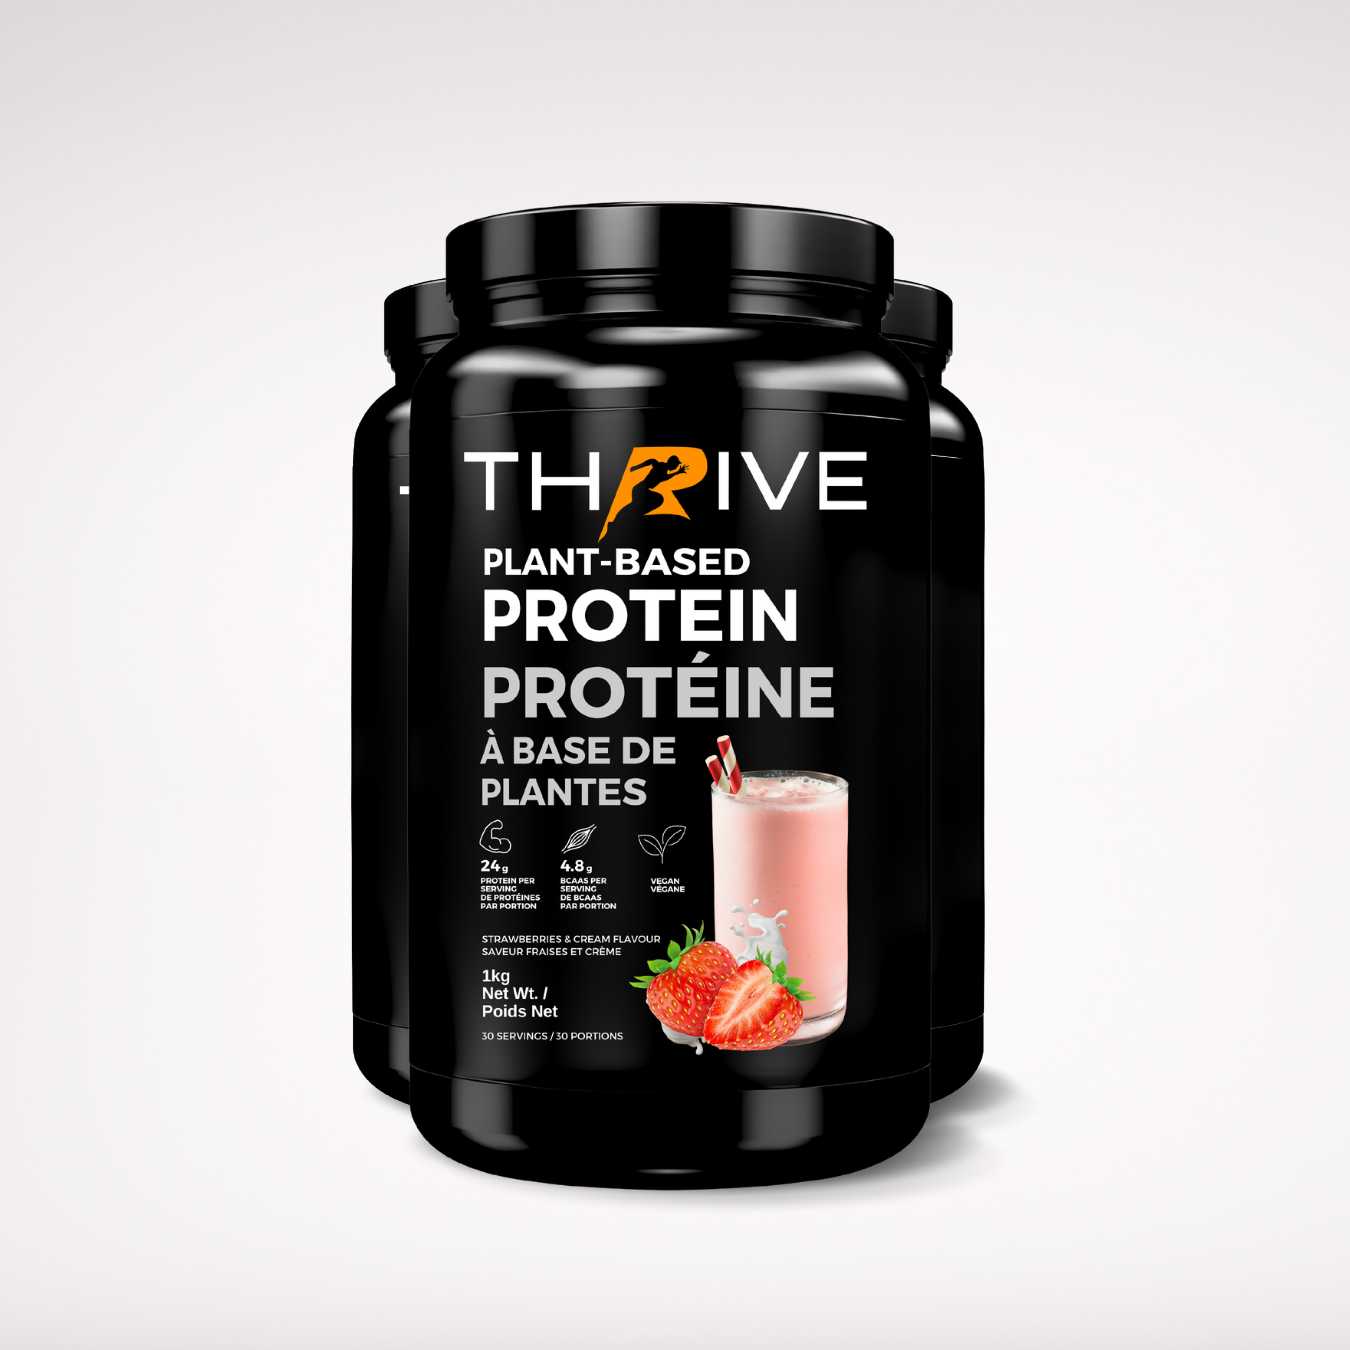 Thrive Plant-Based Protein Strawberries & Cream (3 Units)